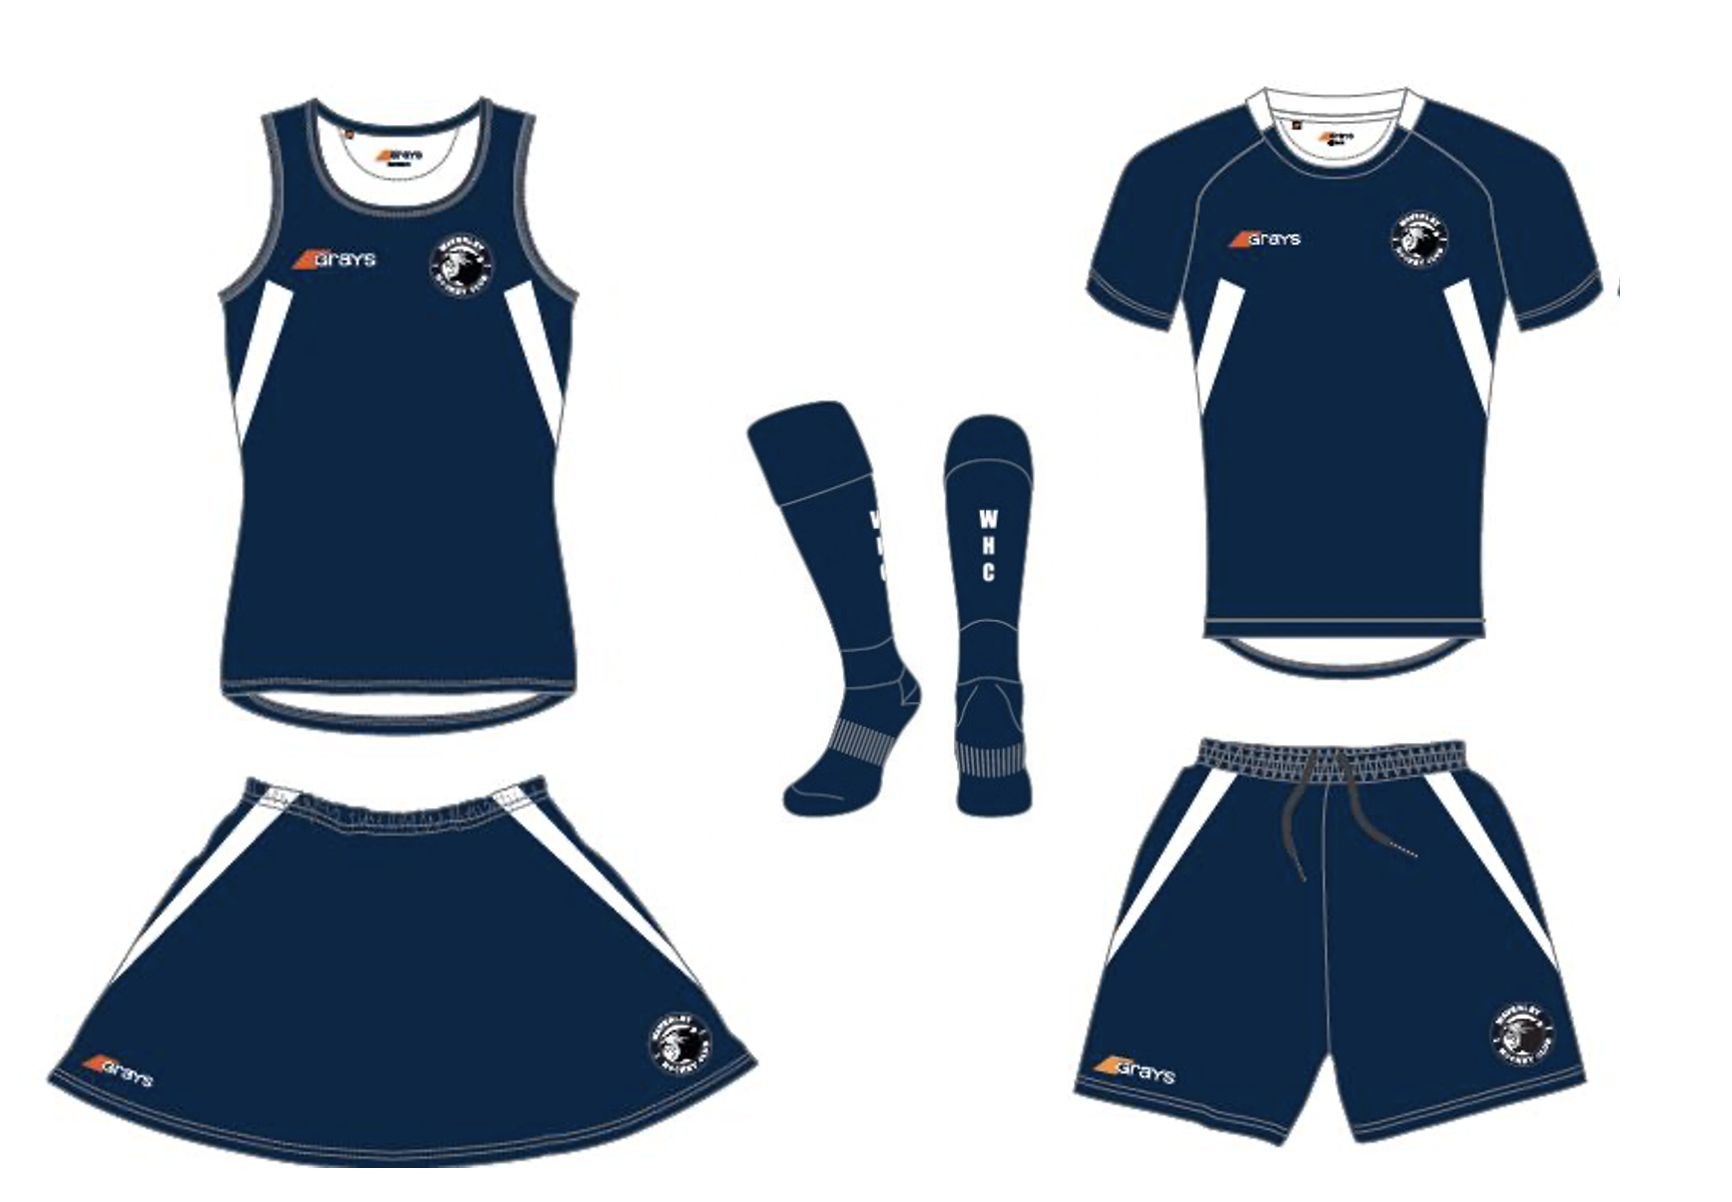 Image of the female (left) and male (right) navy blue home uniform for Waverley Hockey Club